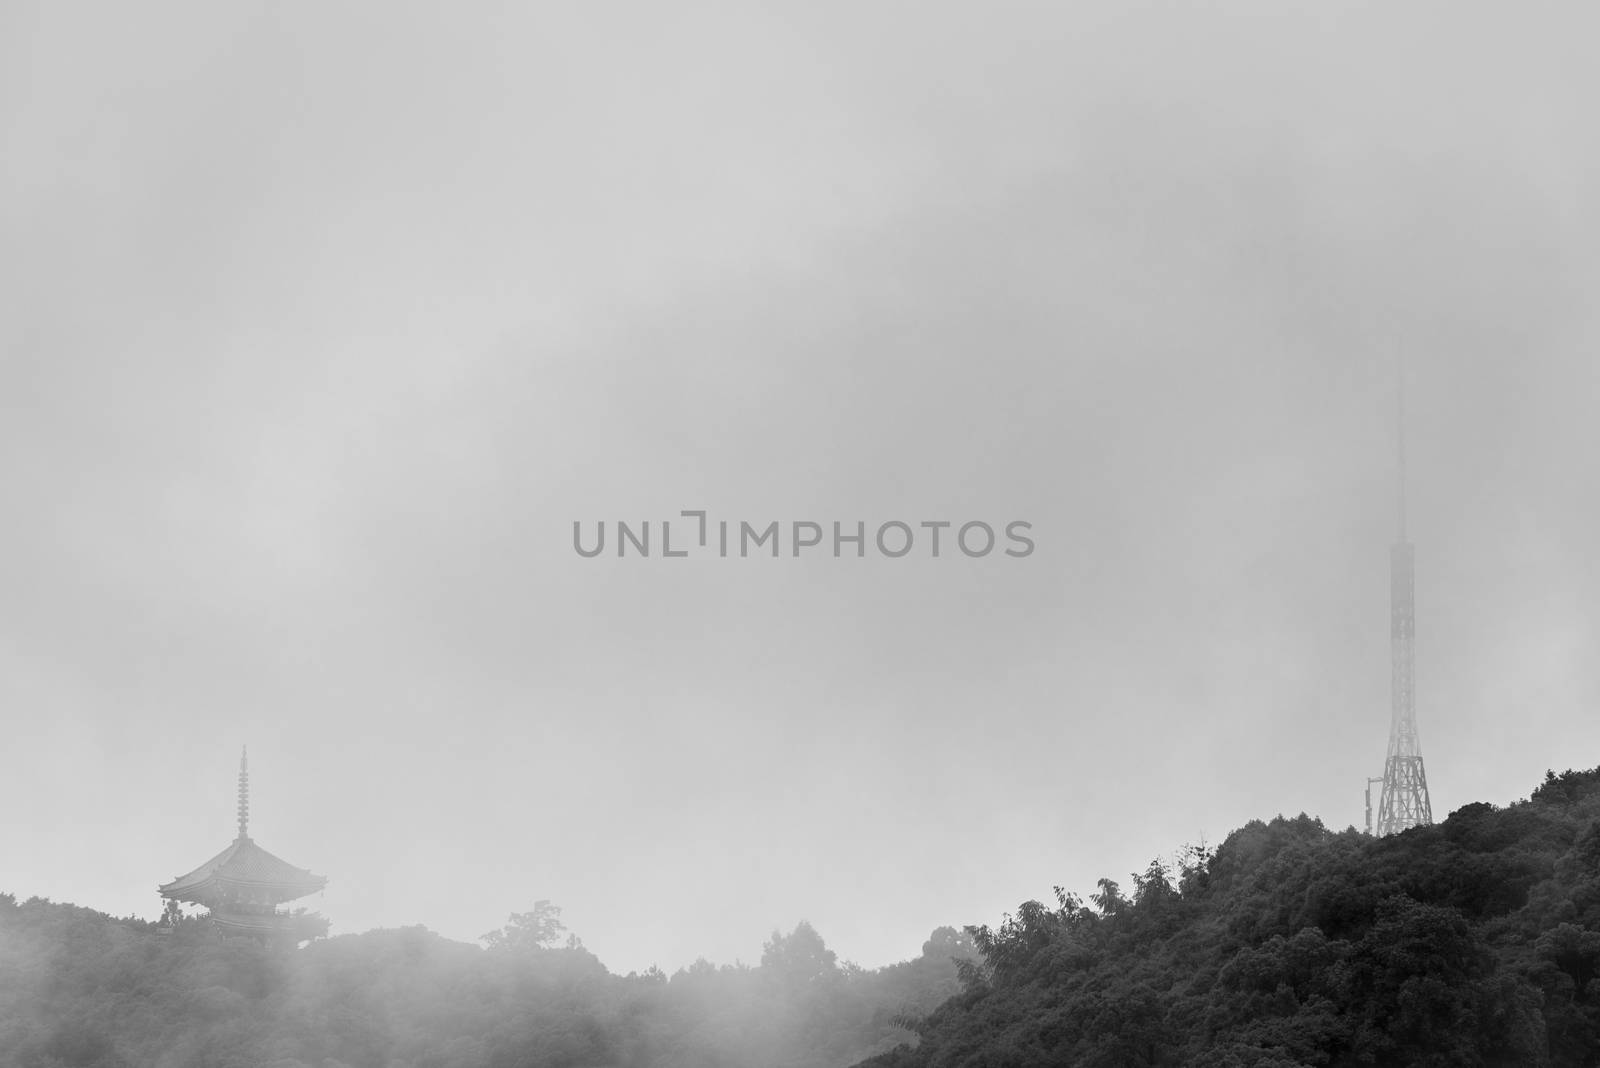 A black and white photo of an old Japanese Pagoda next to a modern radio tower on top of a mountain on a rainy, foggy day.